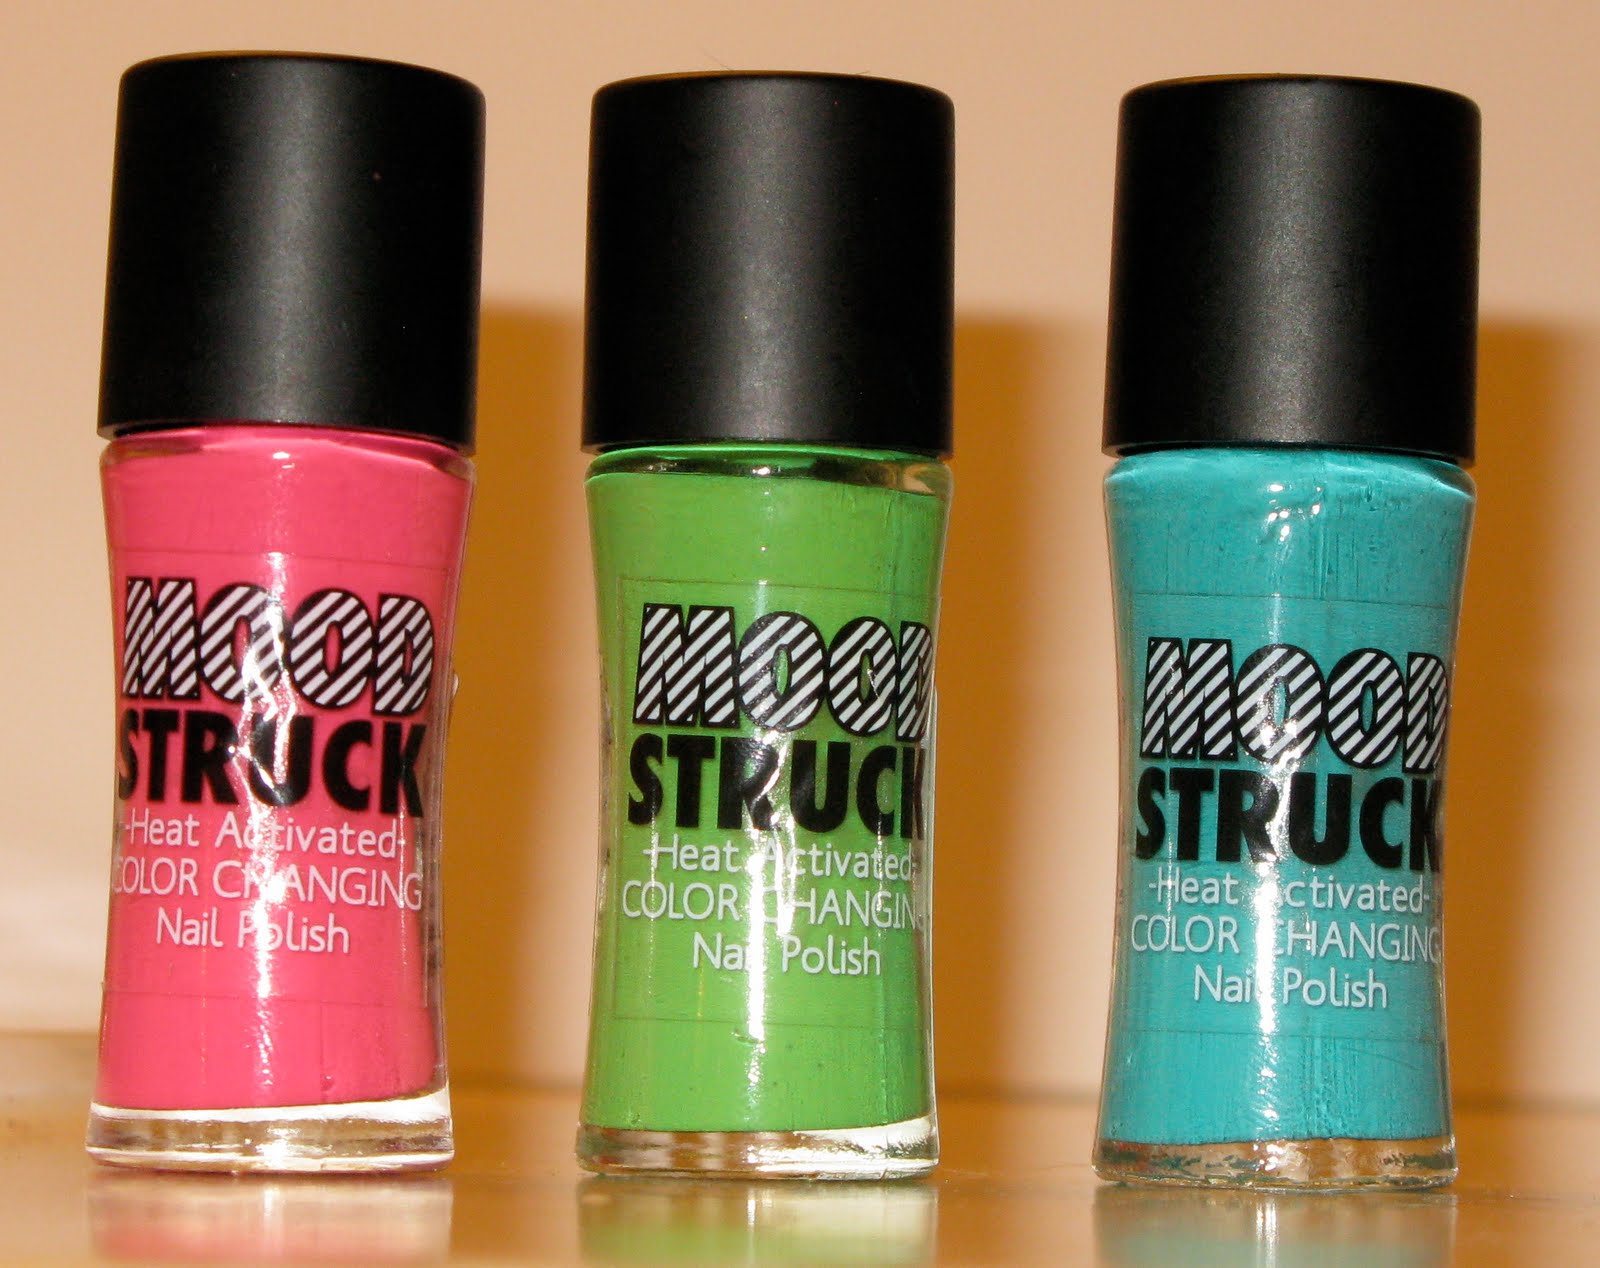 1. Del Sol Color Changing Nail Polish - wide 5